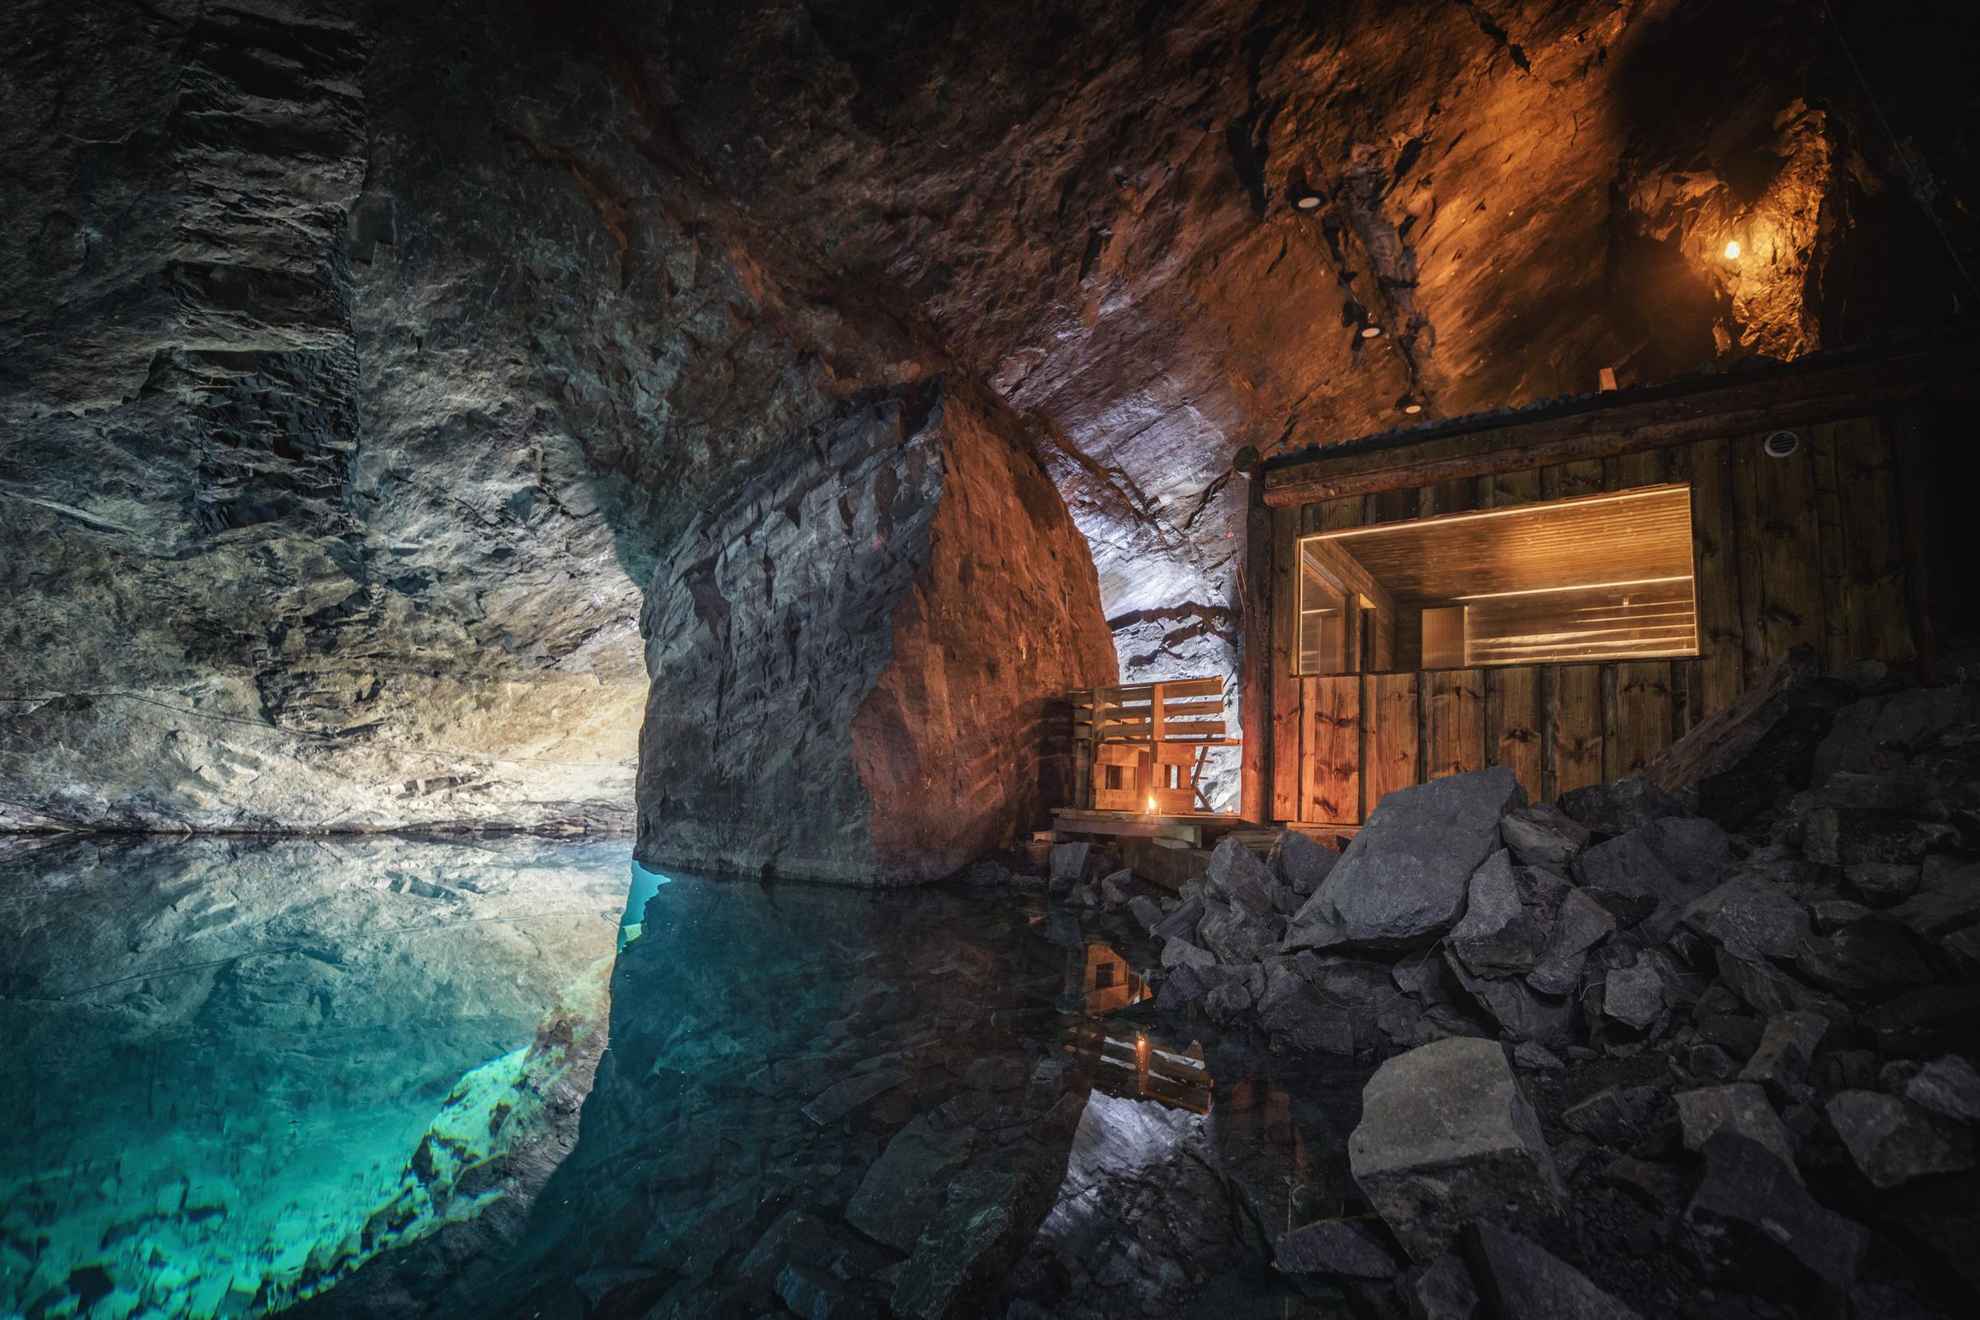 A wooden sauna by the blue clear water inside a mine.